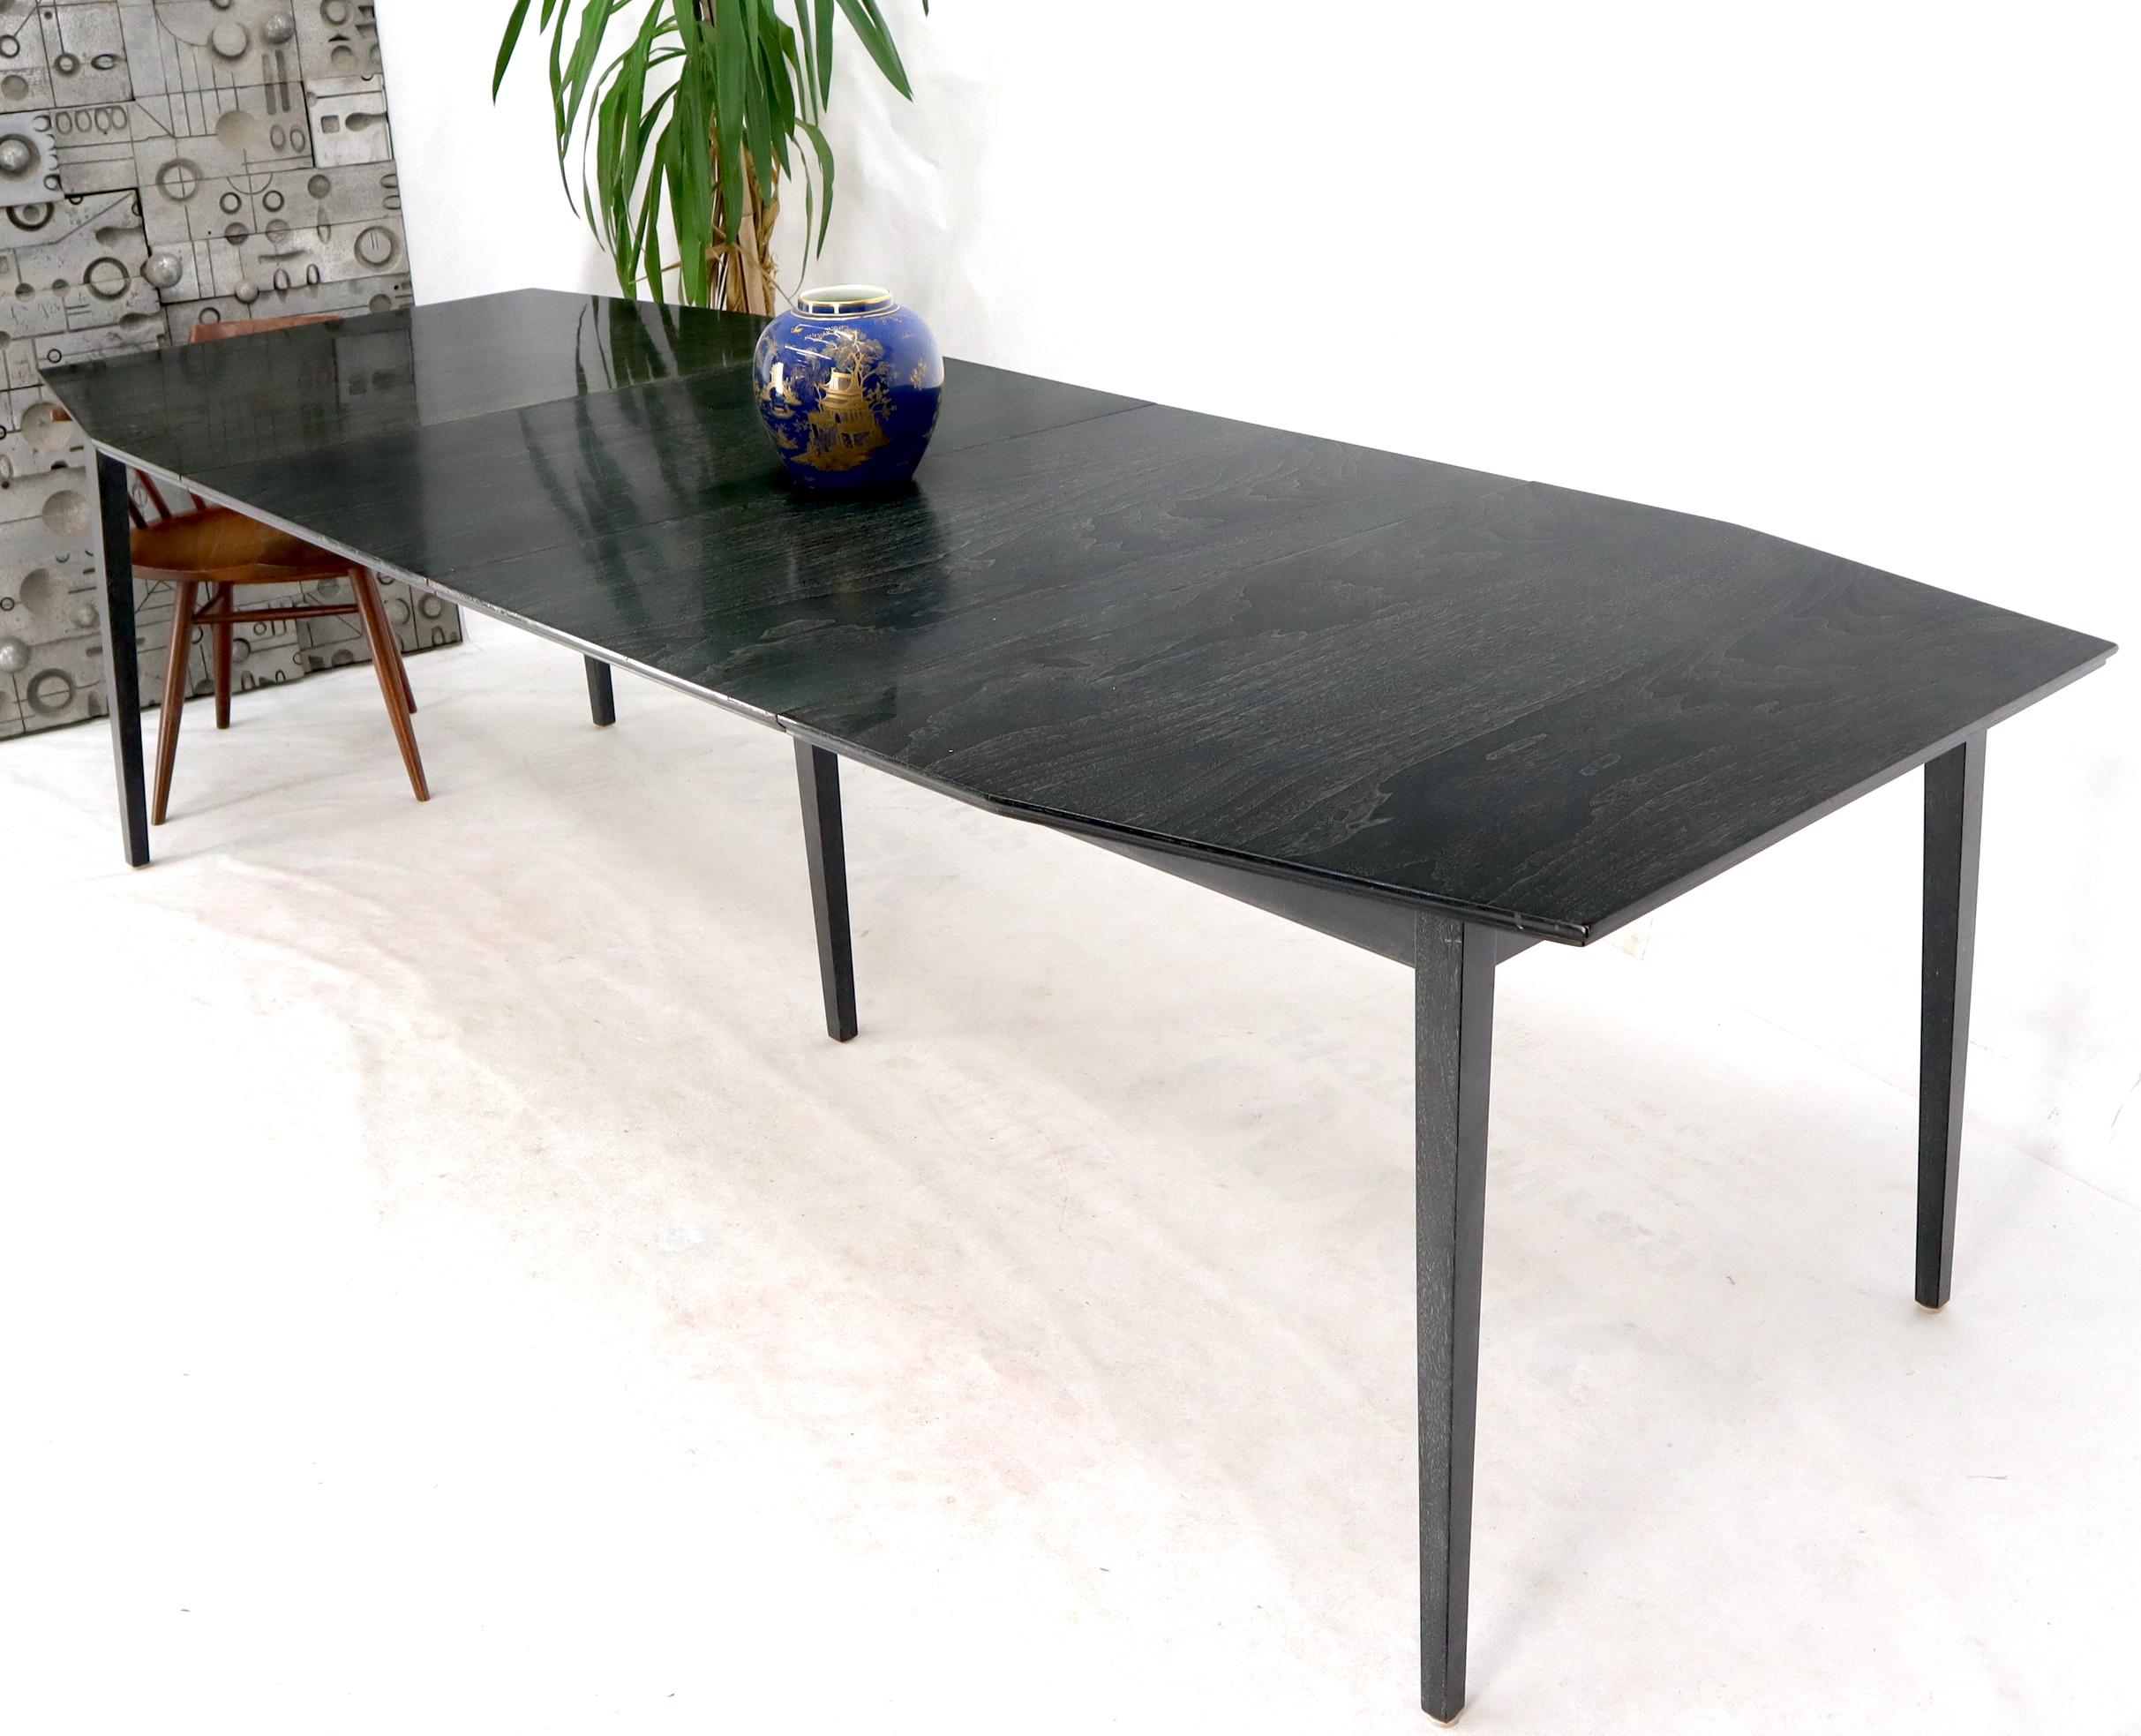 Rare Ebonized Cerused Walnut Mid-Century Modern Dining Table w/ Two Extensions In Good Condition For Sale In Rockaway, NJ